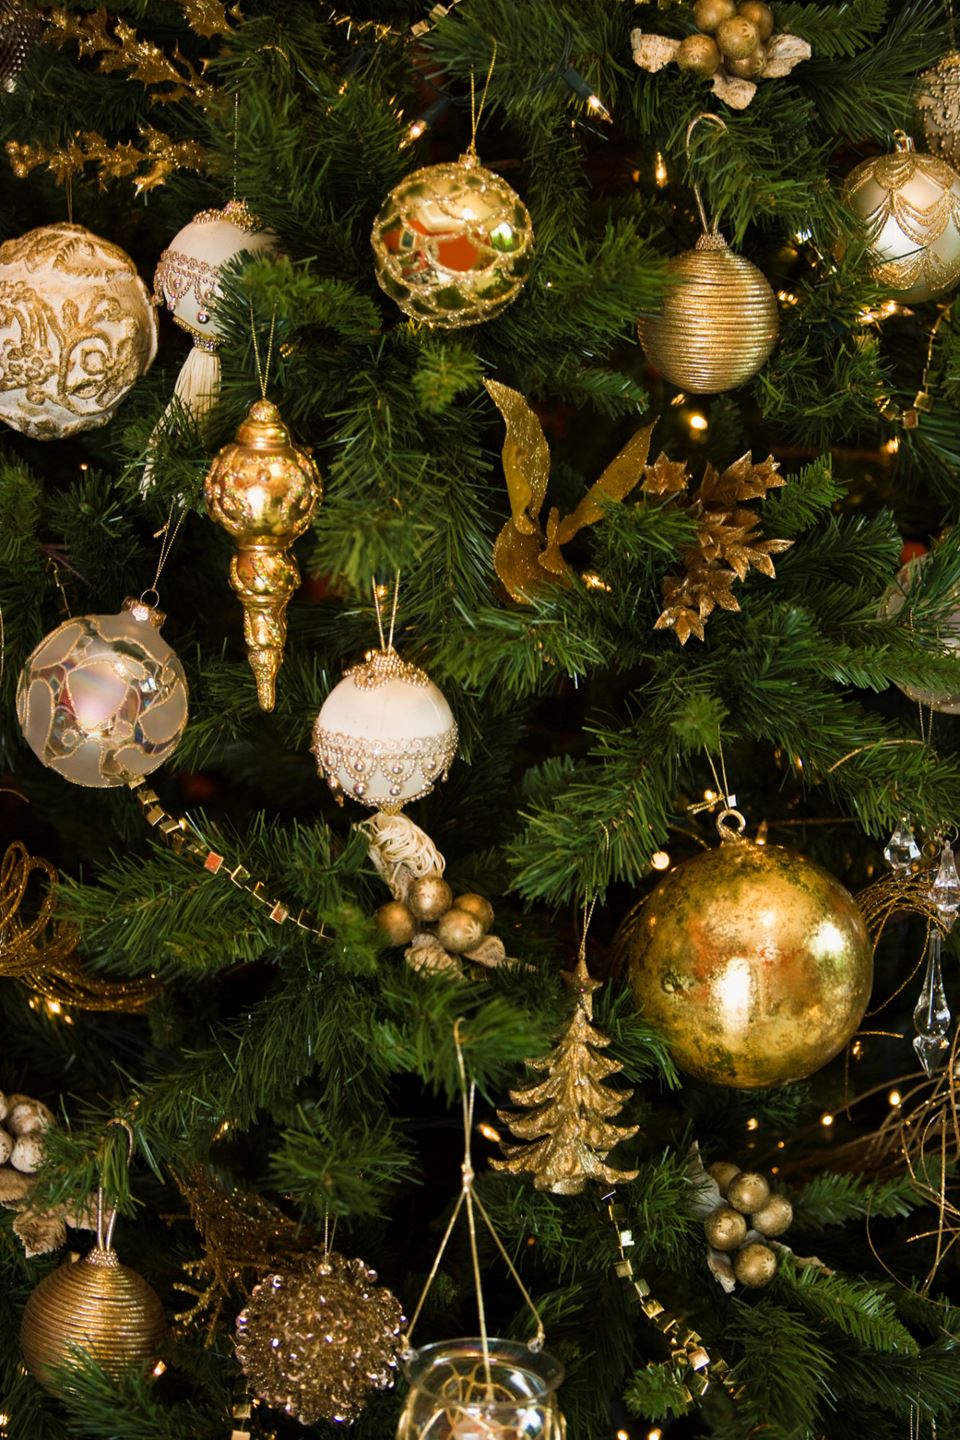 The Christmas tree is to be put outdoor and not into the stove. Most municipalities provide collecting washed up Christmas trees. Please contact your local waste department for more info. Photo: Thinkstock.